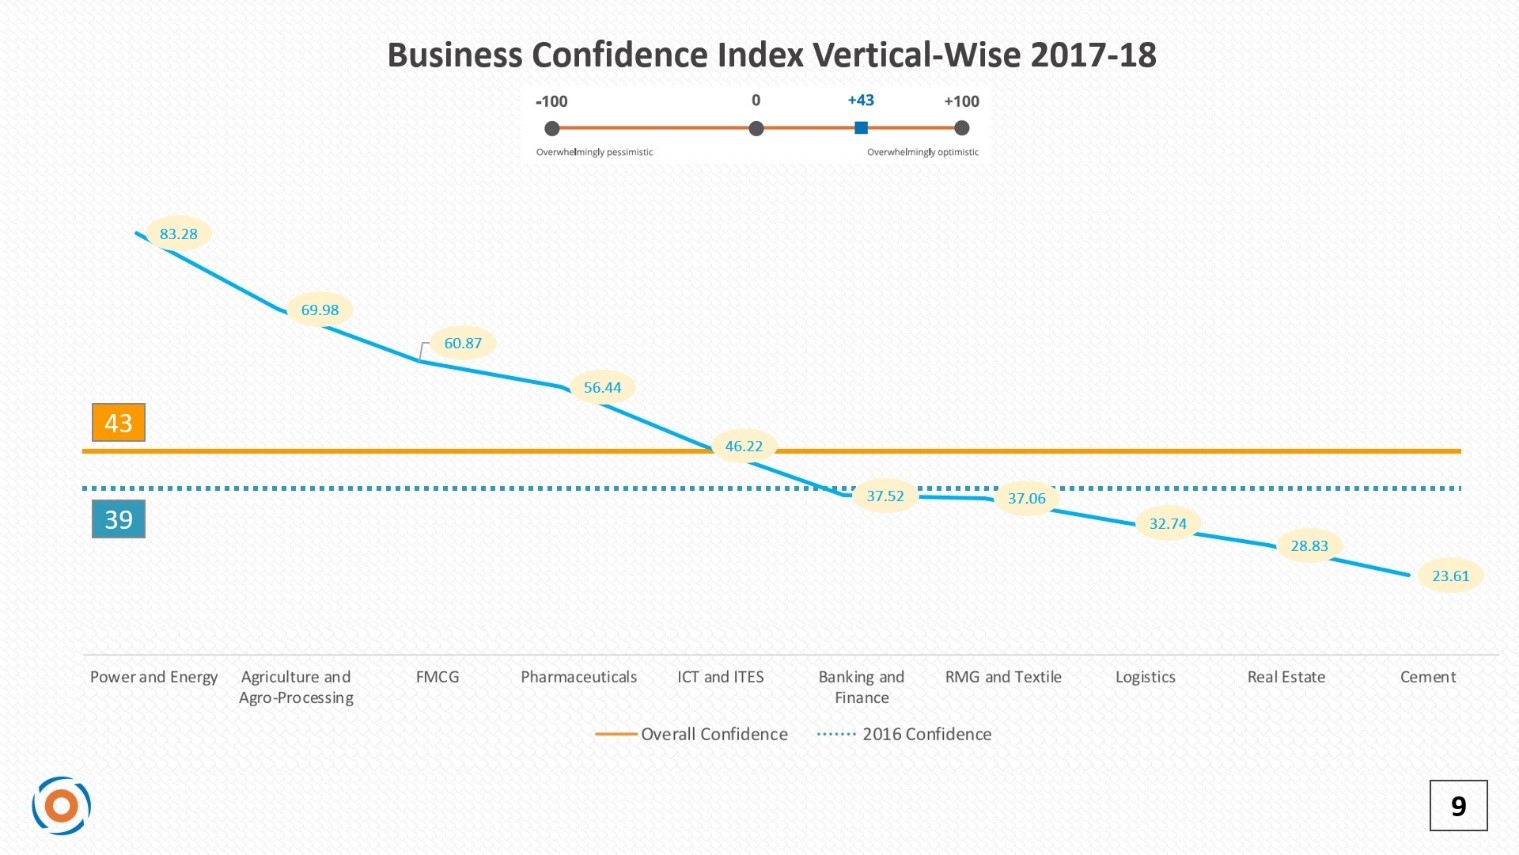 Business confidence index across different industries